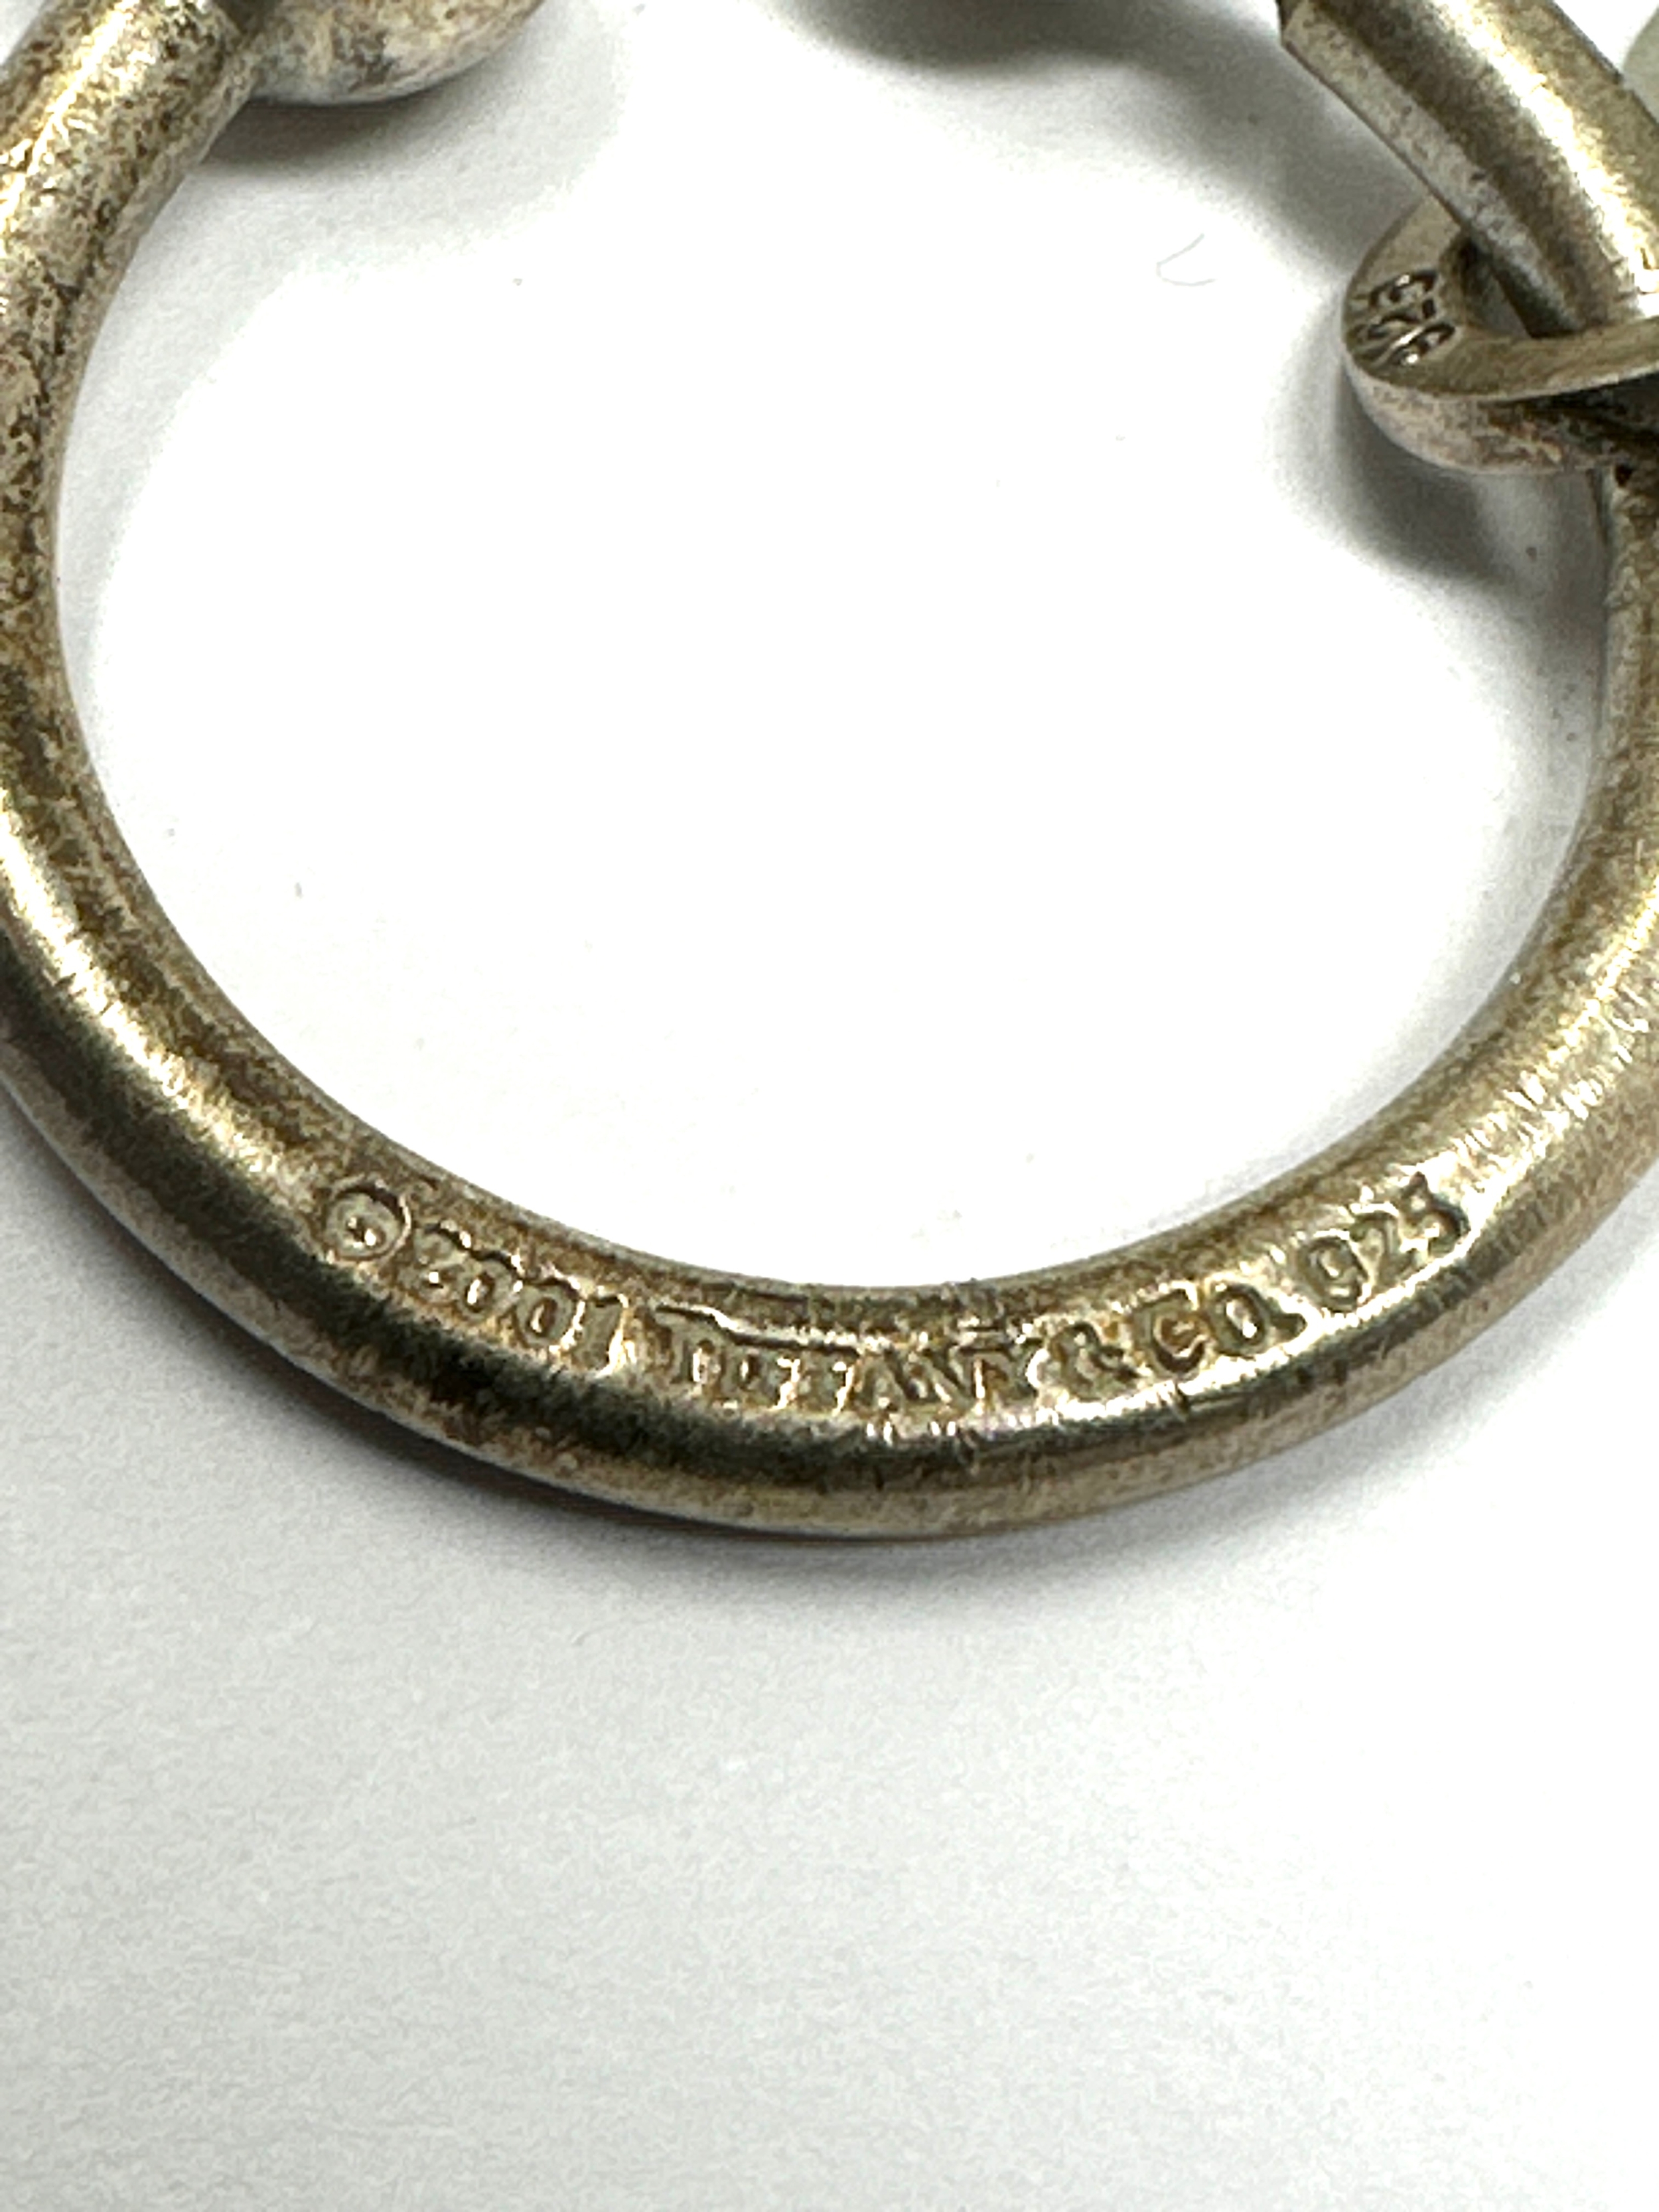 Tiffany & Co Sterling Horseshoe Key Ring - Please Return to NY heart Tag weight 21g - Image 3 of 5